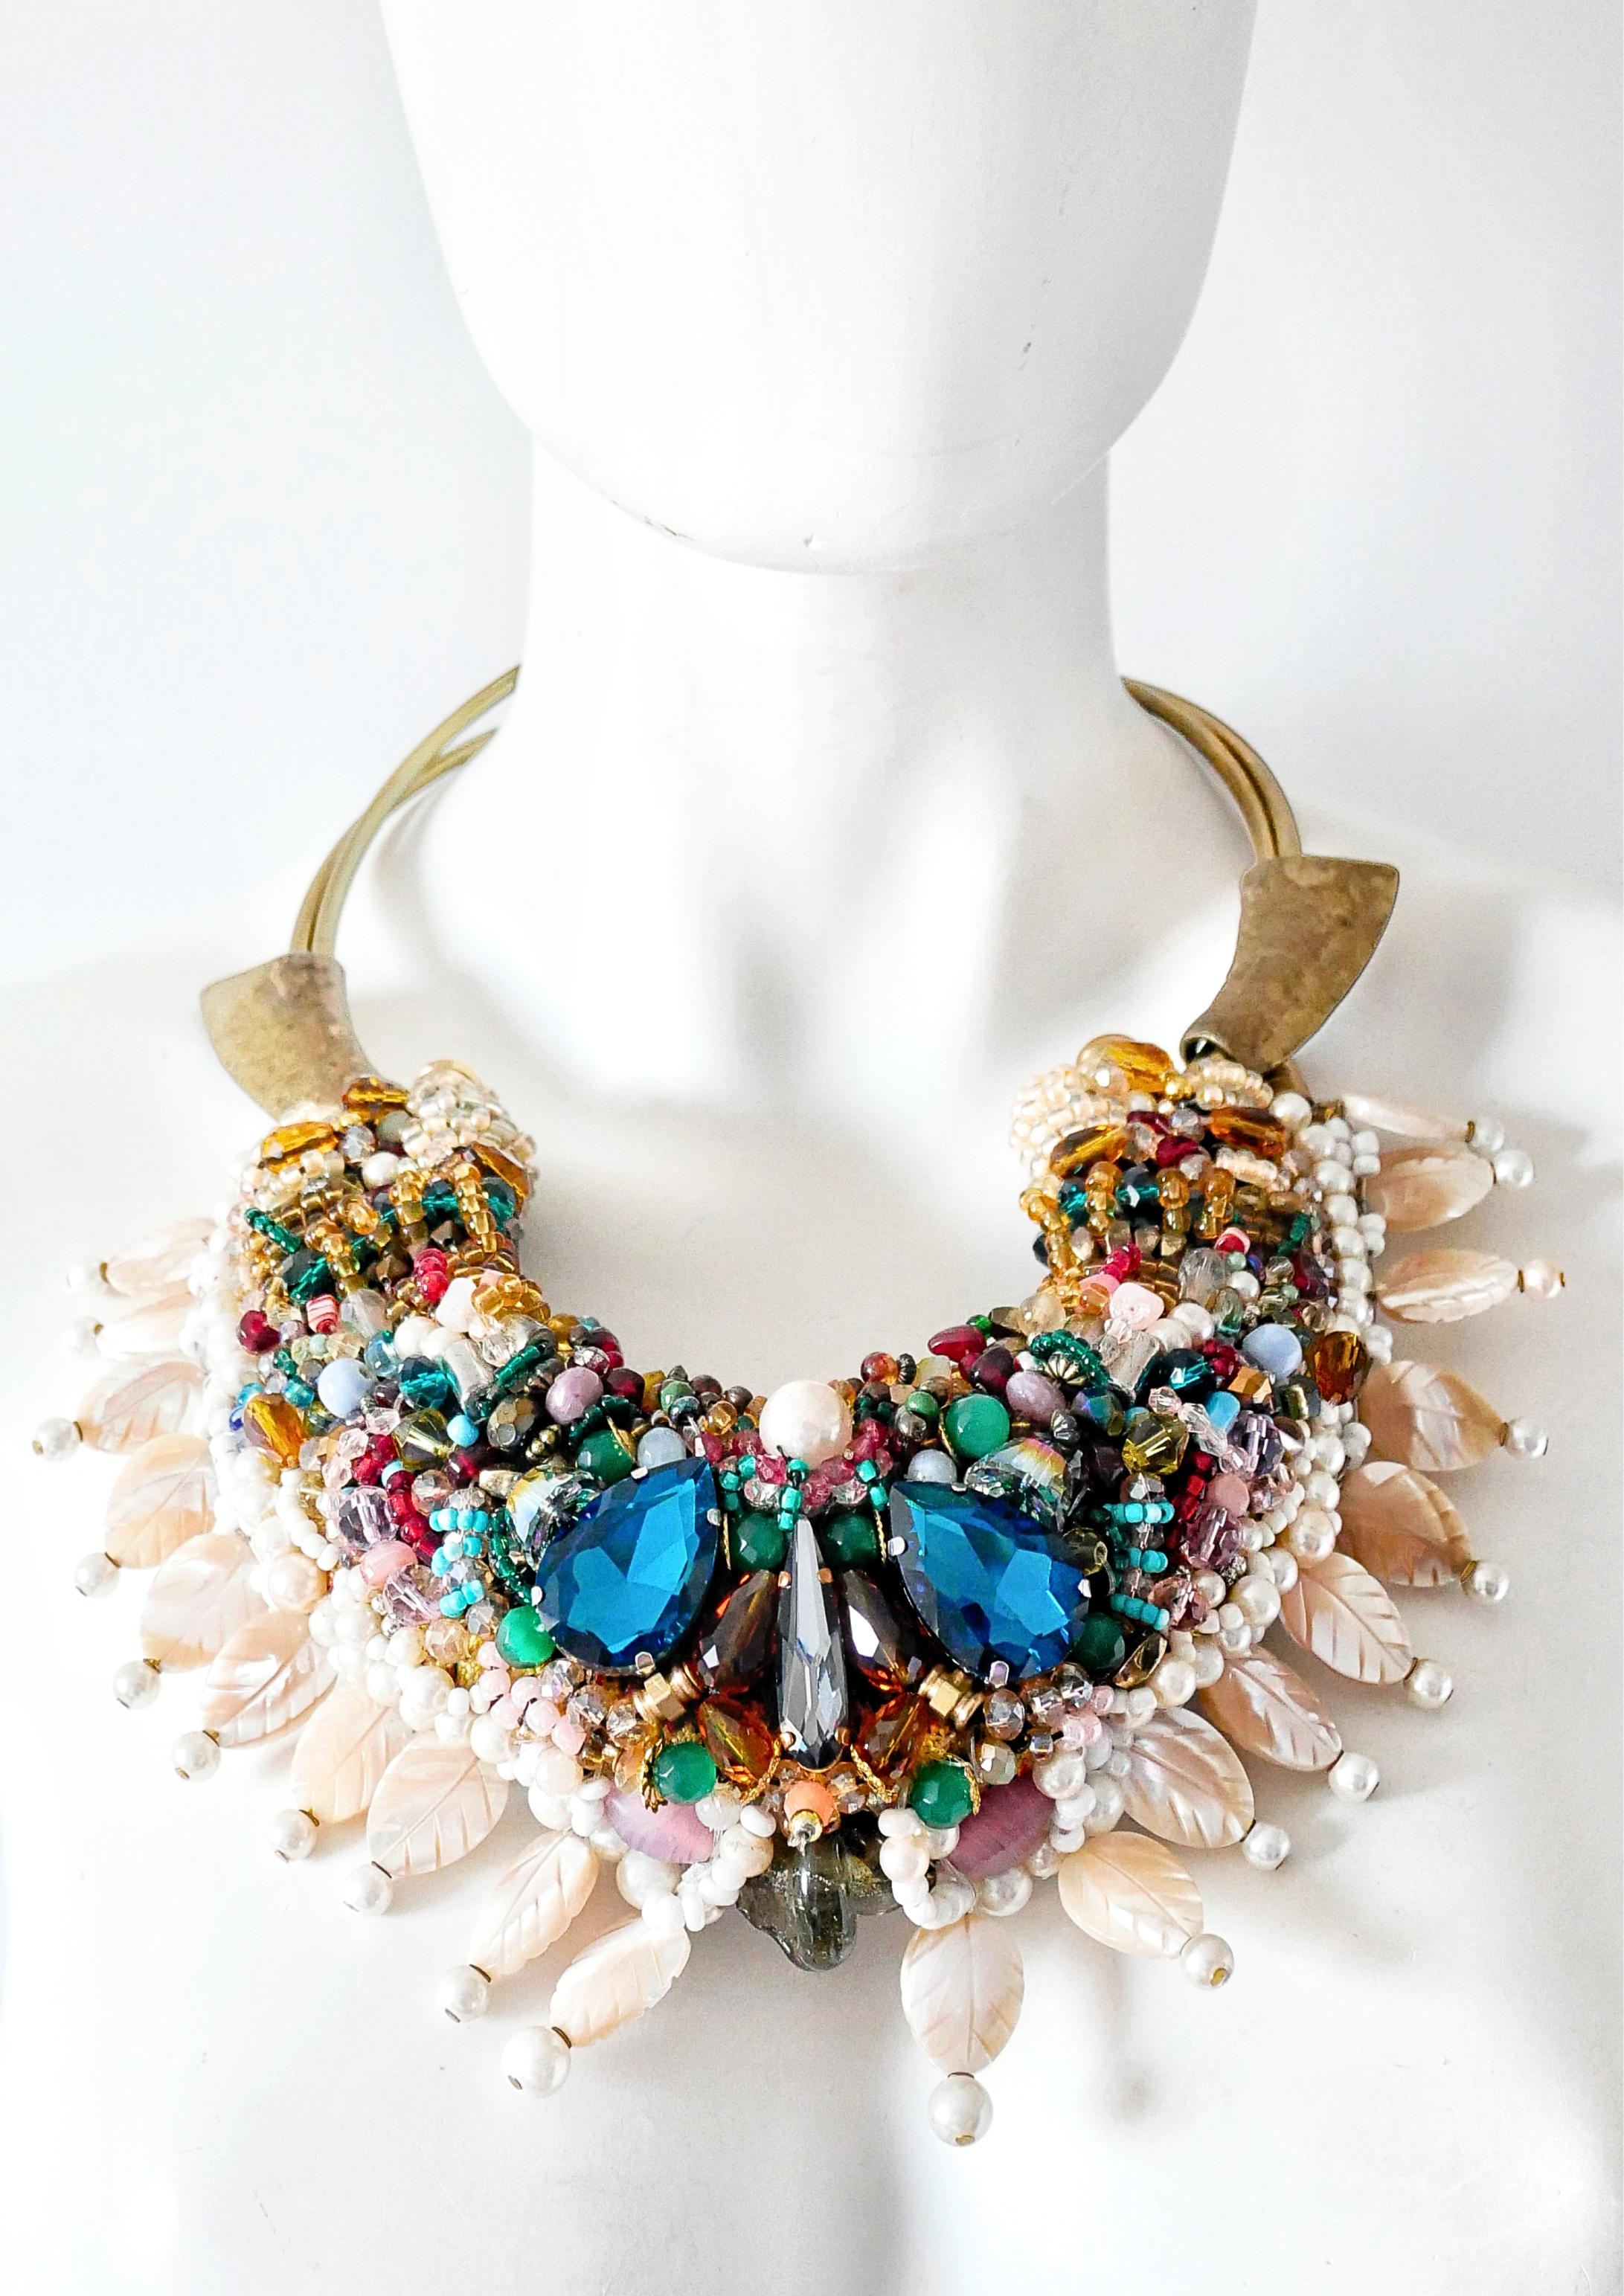 Introducing to you a mother of pearl, crystals and gemstone beaded statement collar and bib necklace. Unique and captivating, this necklace style is a masterpiece of artisanry, with an intricate design featuring rare glass beads of various colours,